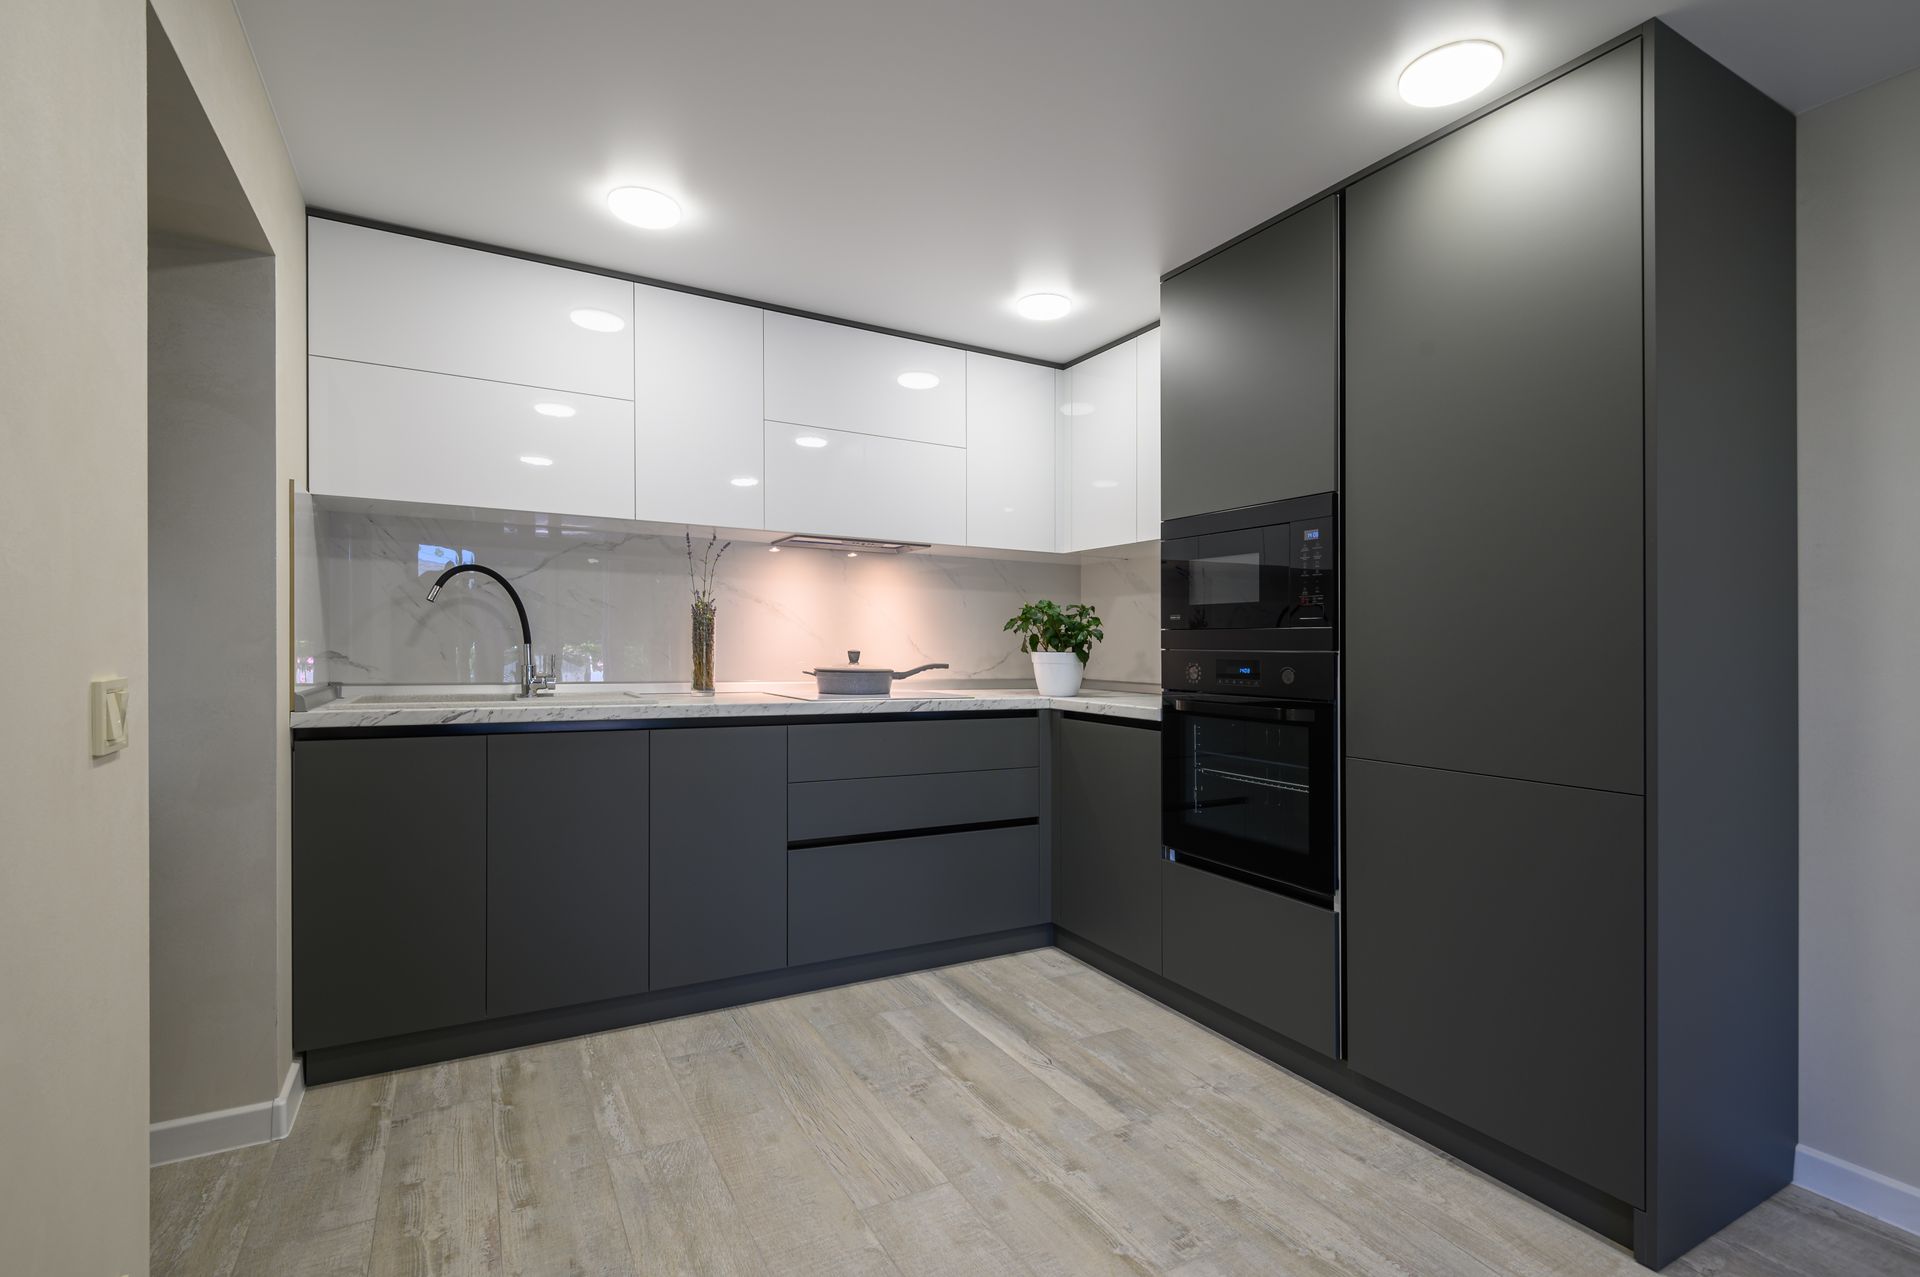 a kitchen with gray and white cabinets and a wooden floor .